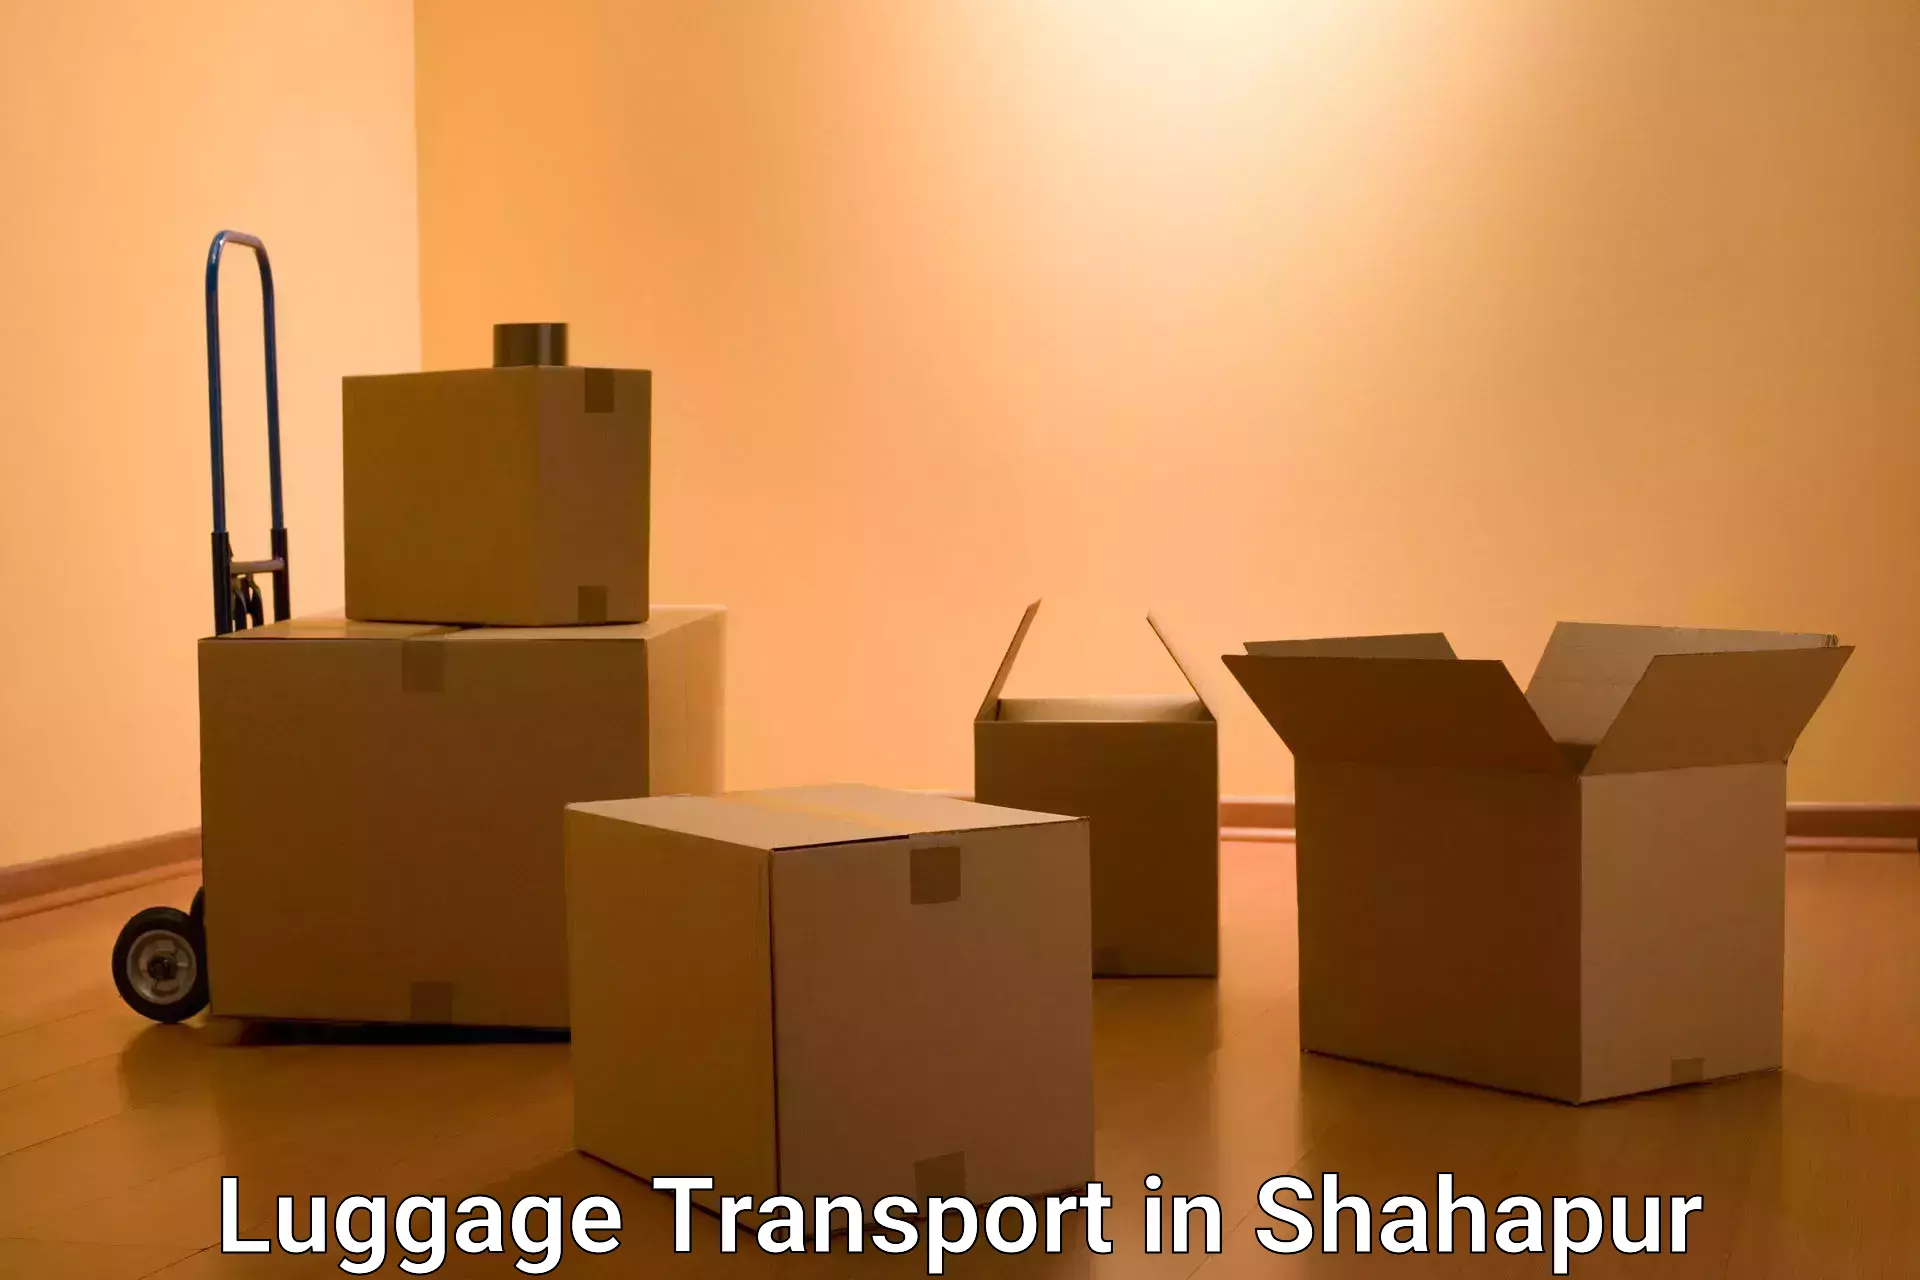 Business luggage transport in Shahapur